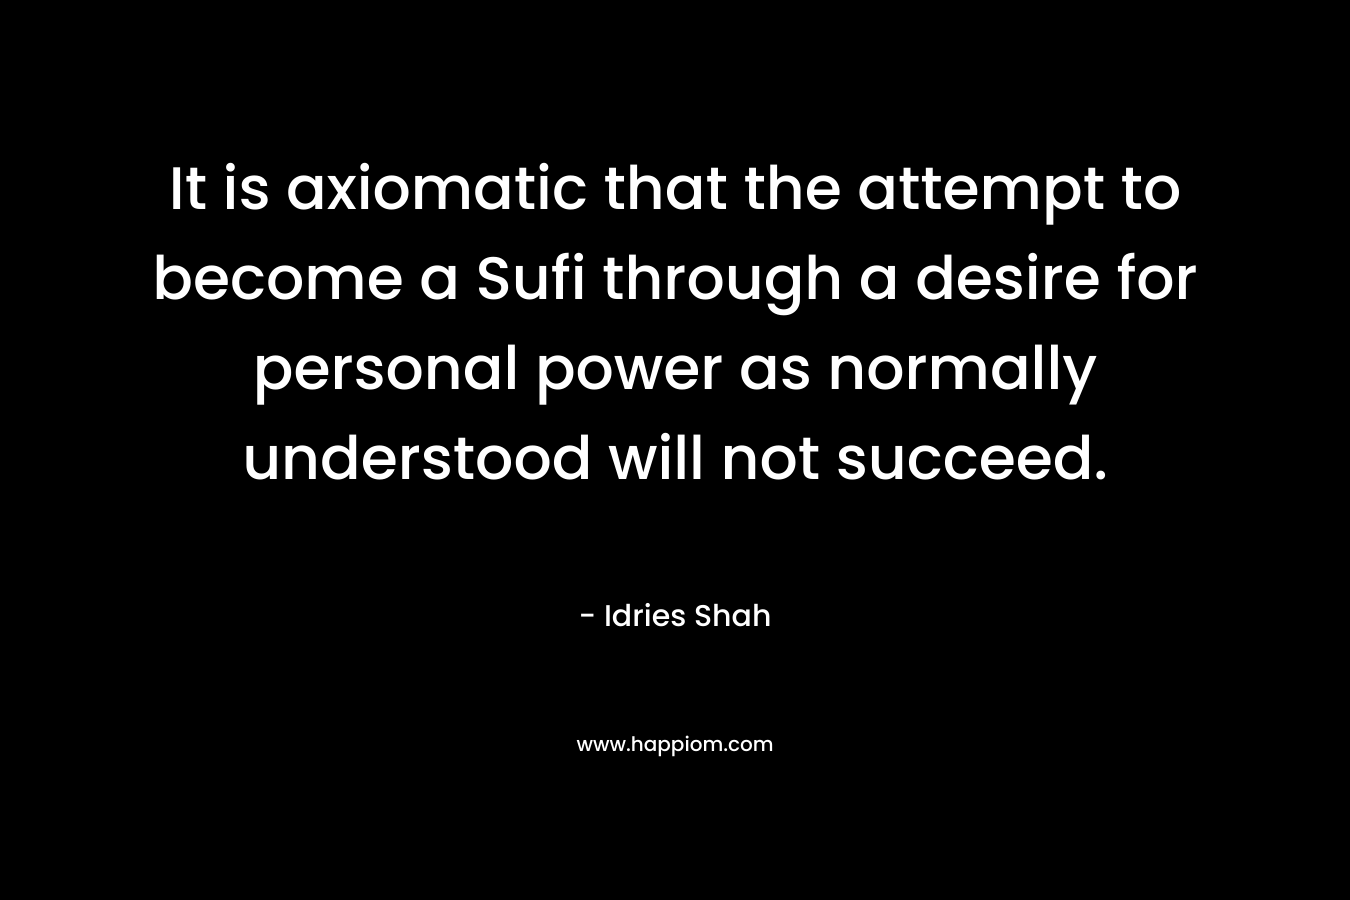 It is axiomatic that the attempt to become a Sufi through a desire for personal power as normally understood will not succeed. – Idries Shah